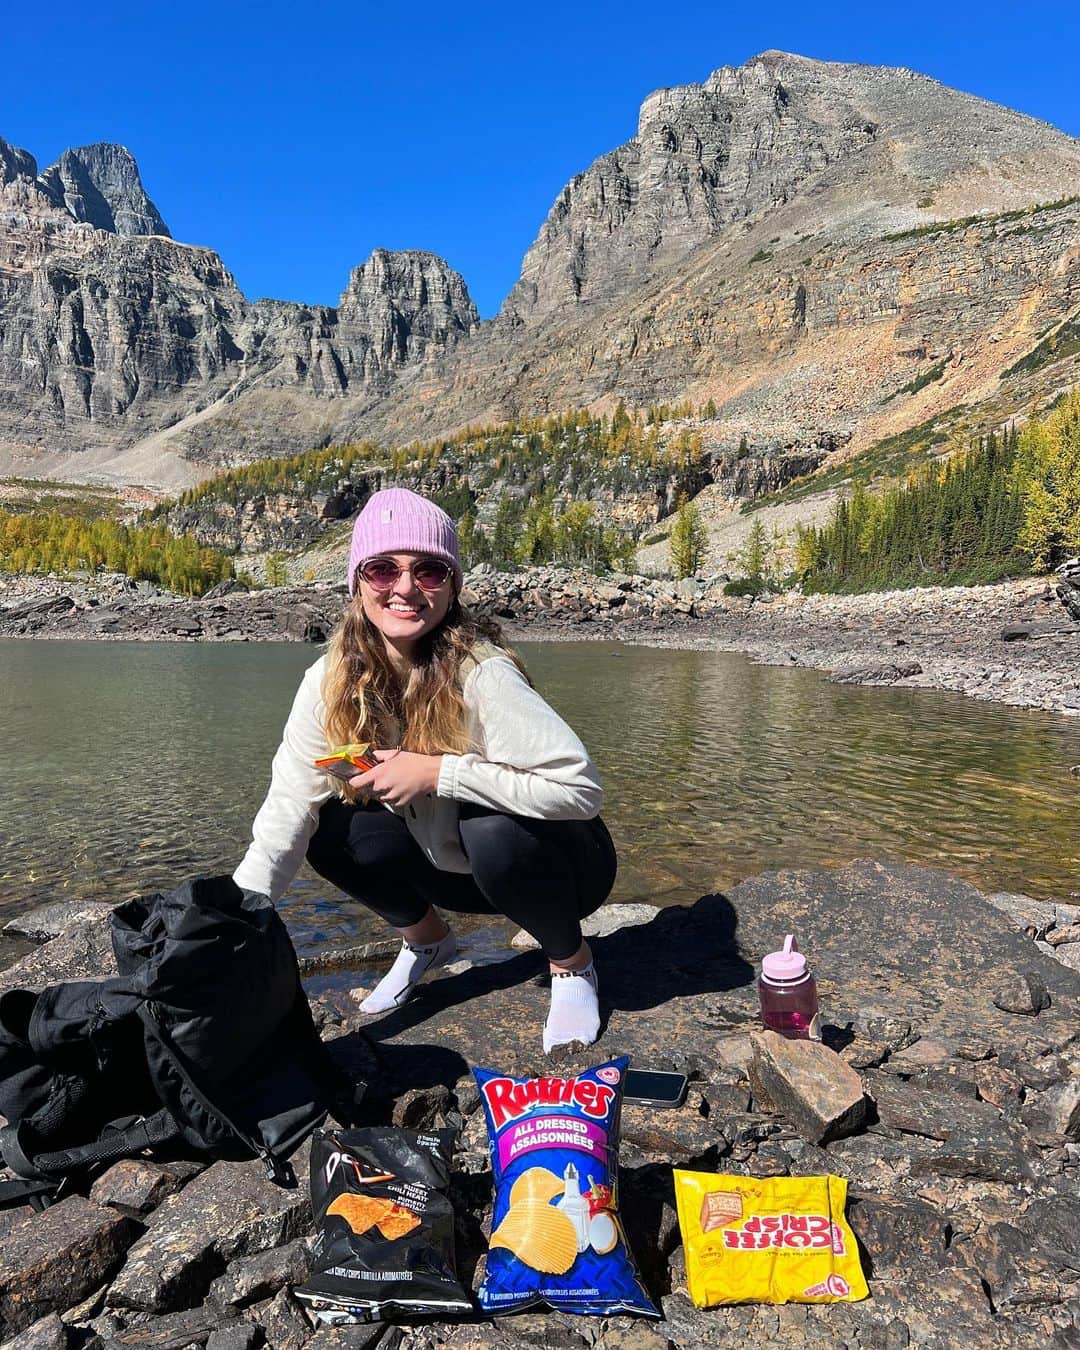 Zanna Van Dijkさんのインスタグラム写真 - (Zanna Van DijkInstagram)「Banff Photo Dump + TIPS 🇨🇦   Hit SAVE + TAG your adventure buddy! ⛰️   We couldn’t visit Canada and not experience the iconic landscapes and lakes of Banff national park. It’s definitely a more popular destination and for good reason - it is STUNNING! 🤩   🥾 Hike: I highly recommend exploring the trails around the main attractions (like Lake Louise/Moraine) as you’ll often get better views and escape the crowds. Here are some of our favourite routes: ➡️ Little Beehive Lookout (above Lake Louise) ➡️ Eiffel Lake (from Lake Moraine)  ➡️ Cirque Peak via Helen Lake (our favourite hike, very spicy & scrambly)  🧗‍♀️ Climb: If you want to try via ferrata for the first time, check out the Mount Norquay route on the peaks above Banff. You get a guide & it’s perfect for beginners!  🌊 Swim: We swam every day, our favourite spots for a dip included: ➡️ Helen Lake  ➡️ Eiffel Lake  ➡️ Two Jack Lake  These three are not as glacial as many lakes in Banff, but still cold and refreshing.  🚗 Travel: You definitely need a car to get around and access many trailheads. Some great scenic roads include: ➡️ Icefields Parkway  ➡️ Bow Valley Parkway   🏨 Stay: We stayed at @basecampsuitesbanff. Each room has its own kitchenette, which is super useful when you’re prepping your own breakfasts & packed lunches every day.  LOTS more info will be in my full Banff travel guide on my website in a few weeks 🥰🇨🇦 #banff #banffnationalpark #banffcanada #banffalberta #banfflife #albertacanada #explorealberta #morainelake」9月24日 23時57分 - zannavandijk